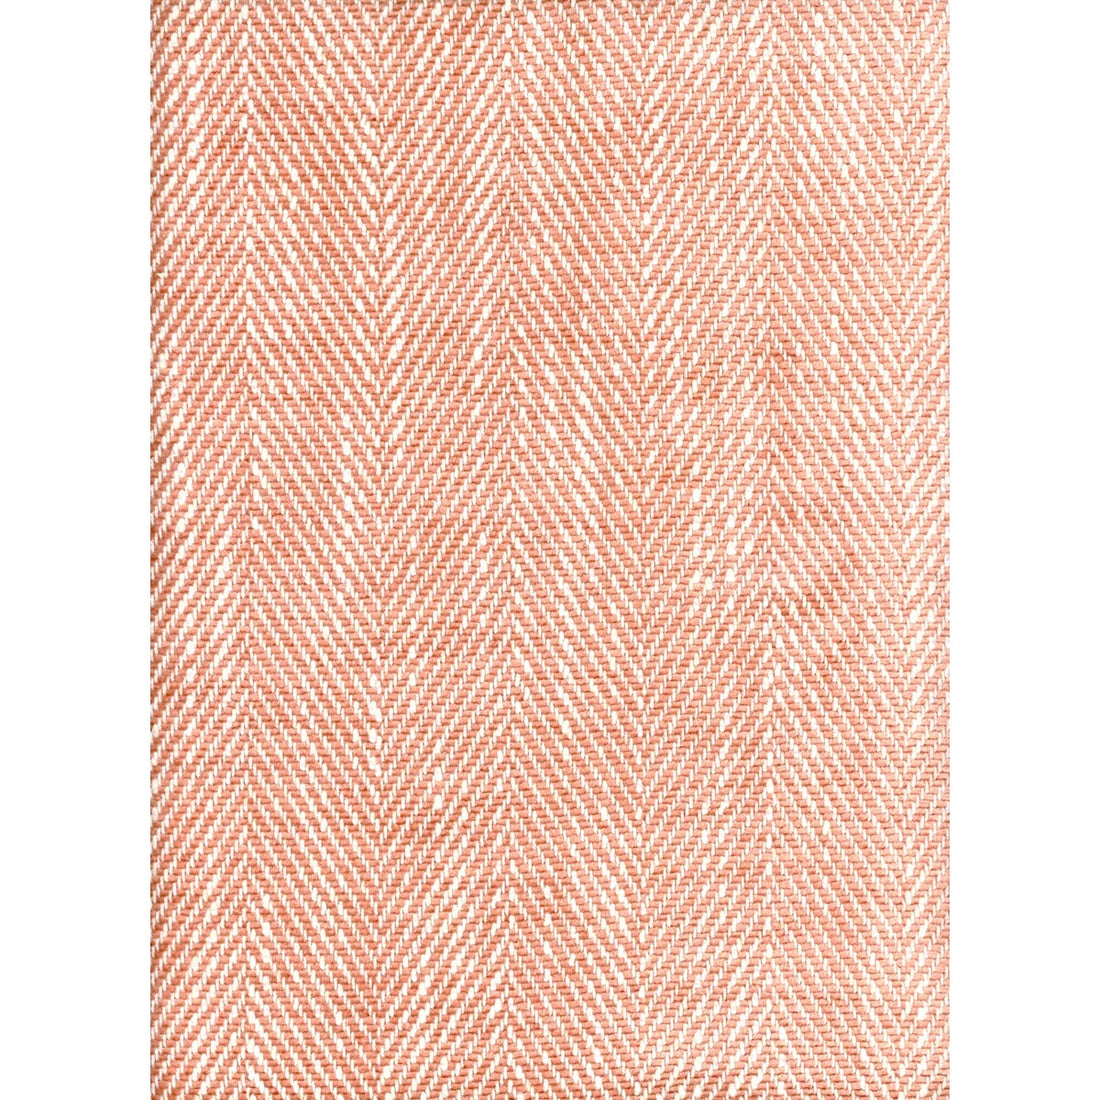 Summit fabric in salmon color - pattern AM100147.117.0 - by Kravet Couture in the Andrew Martin Portofino collection